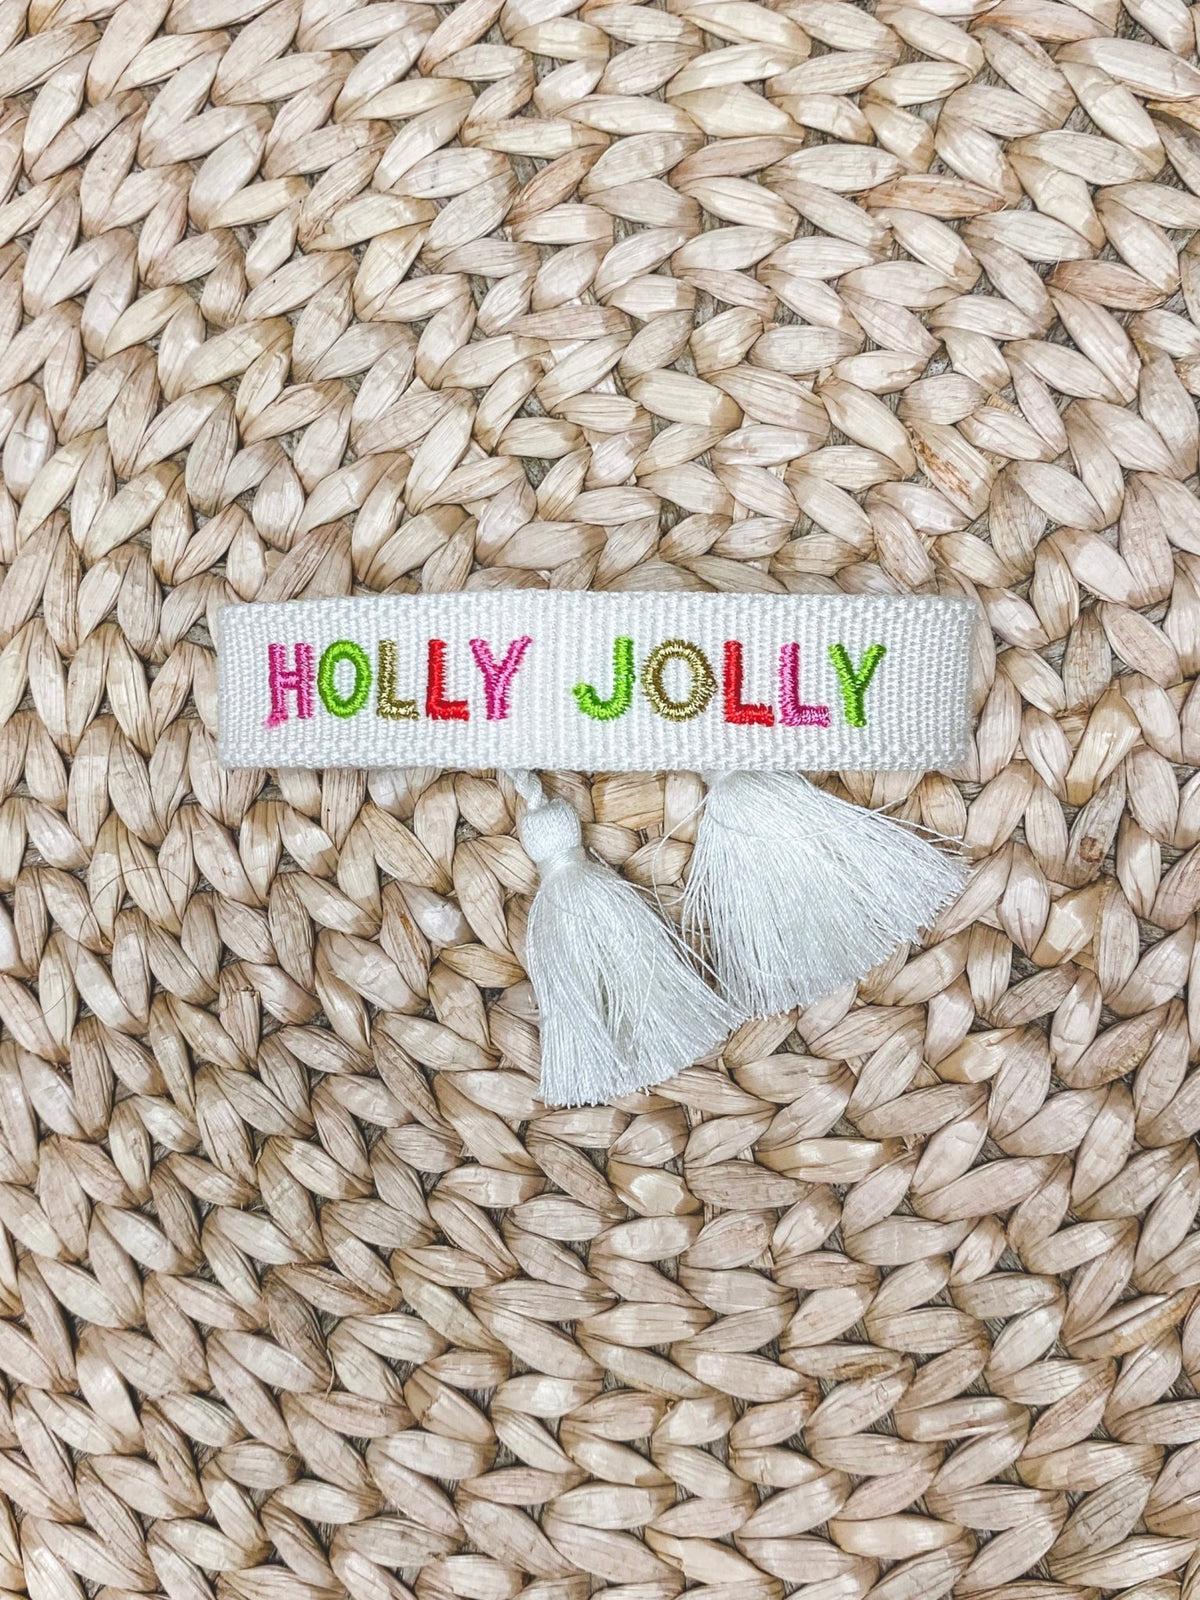 Holly Jolly bracelet cream - Trendy Holiday Apparel at Lush Fashion Lounge Boutique in Oklahoma City